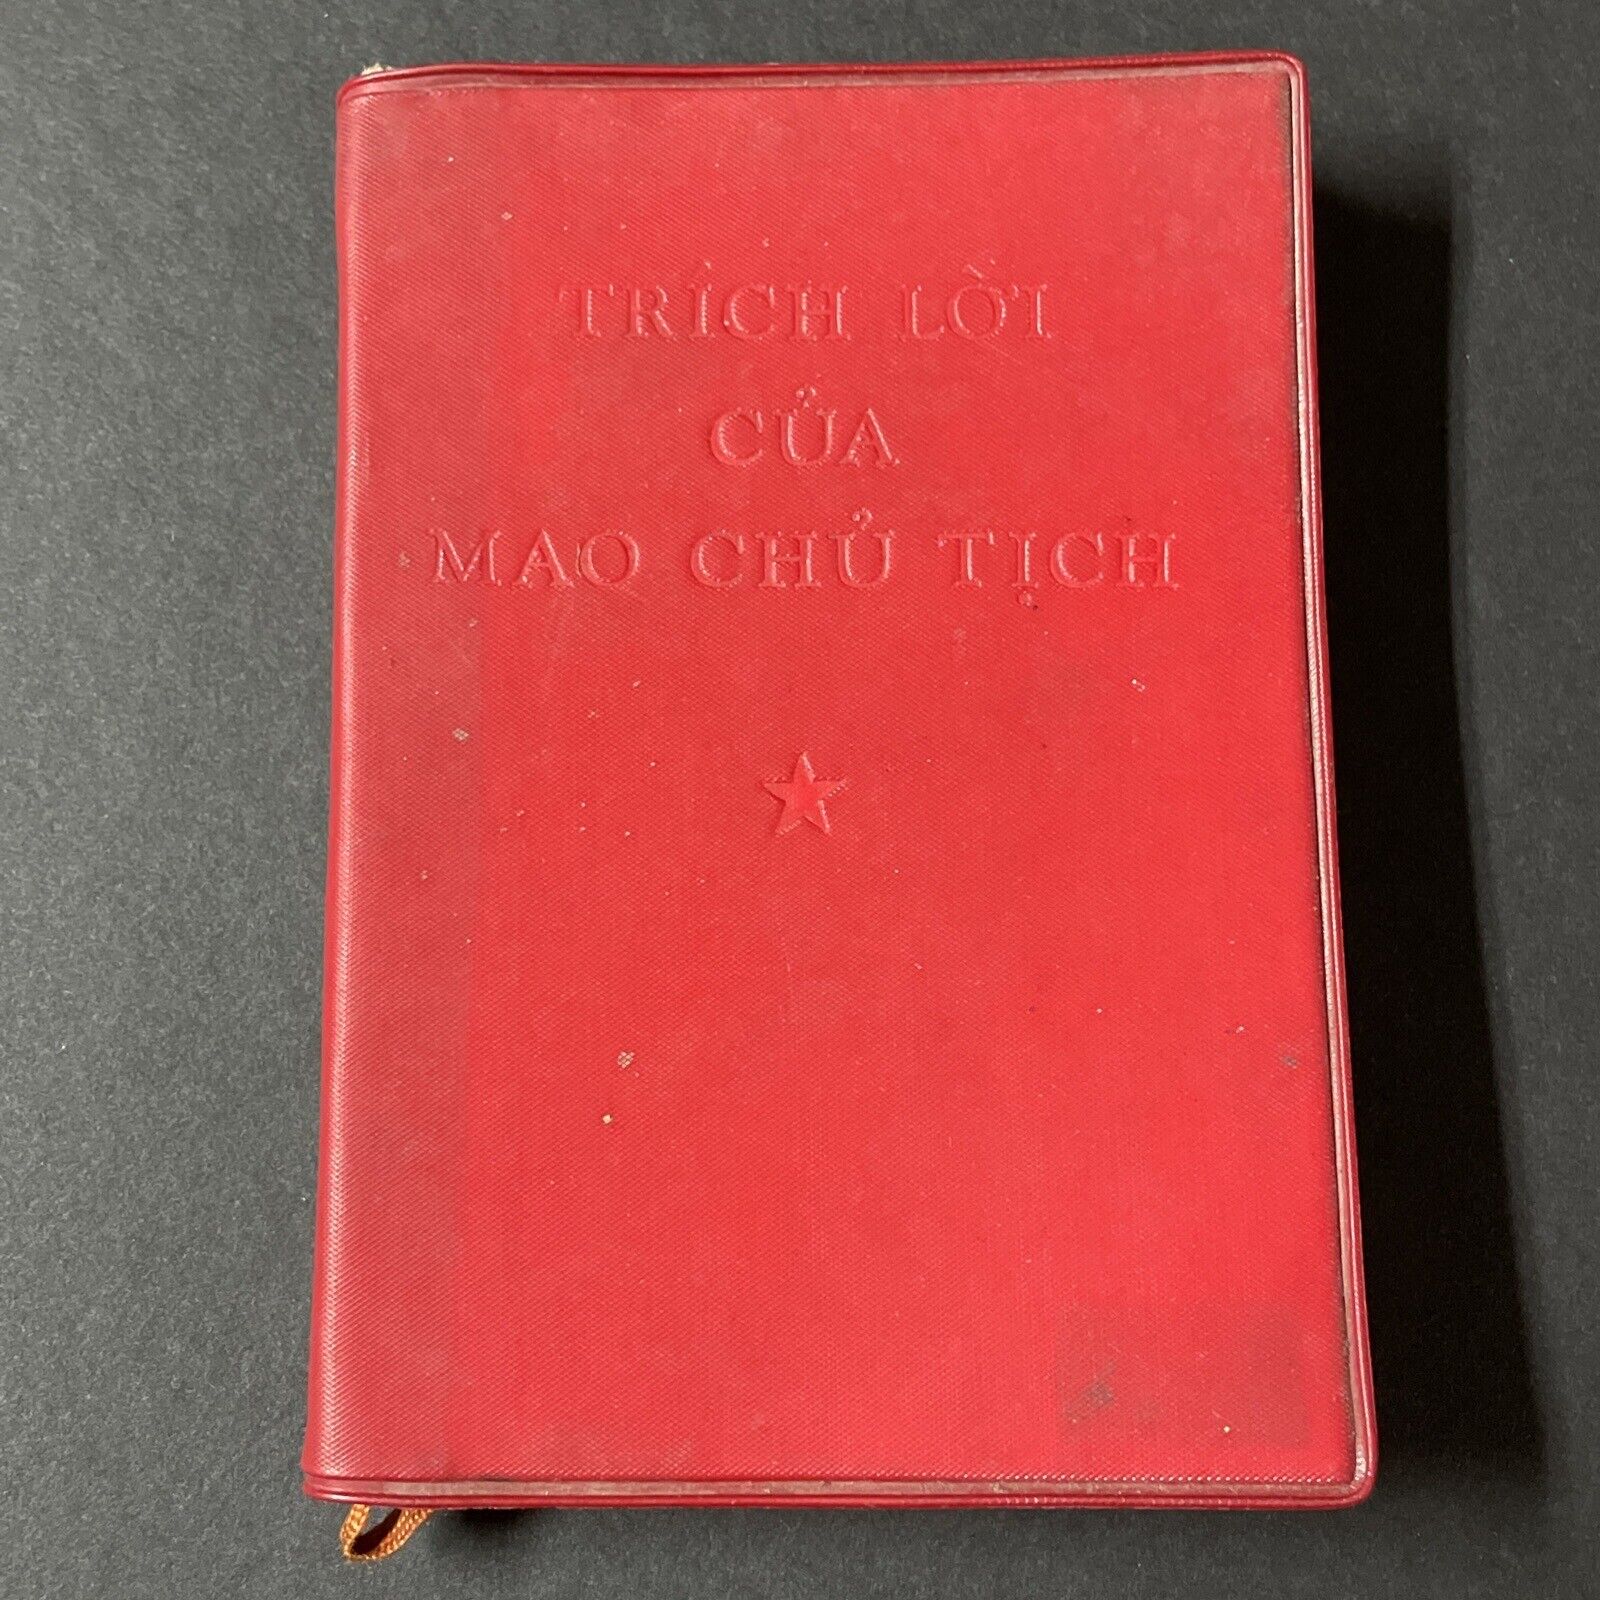 1967 Viet Cong First Edition Quotations From Chairman Mao Vietnamese Book 1st Ed